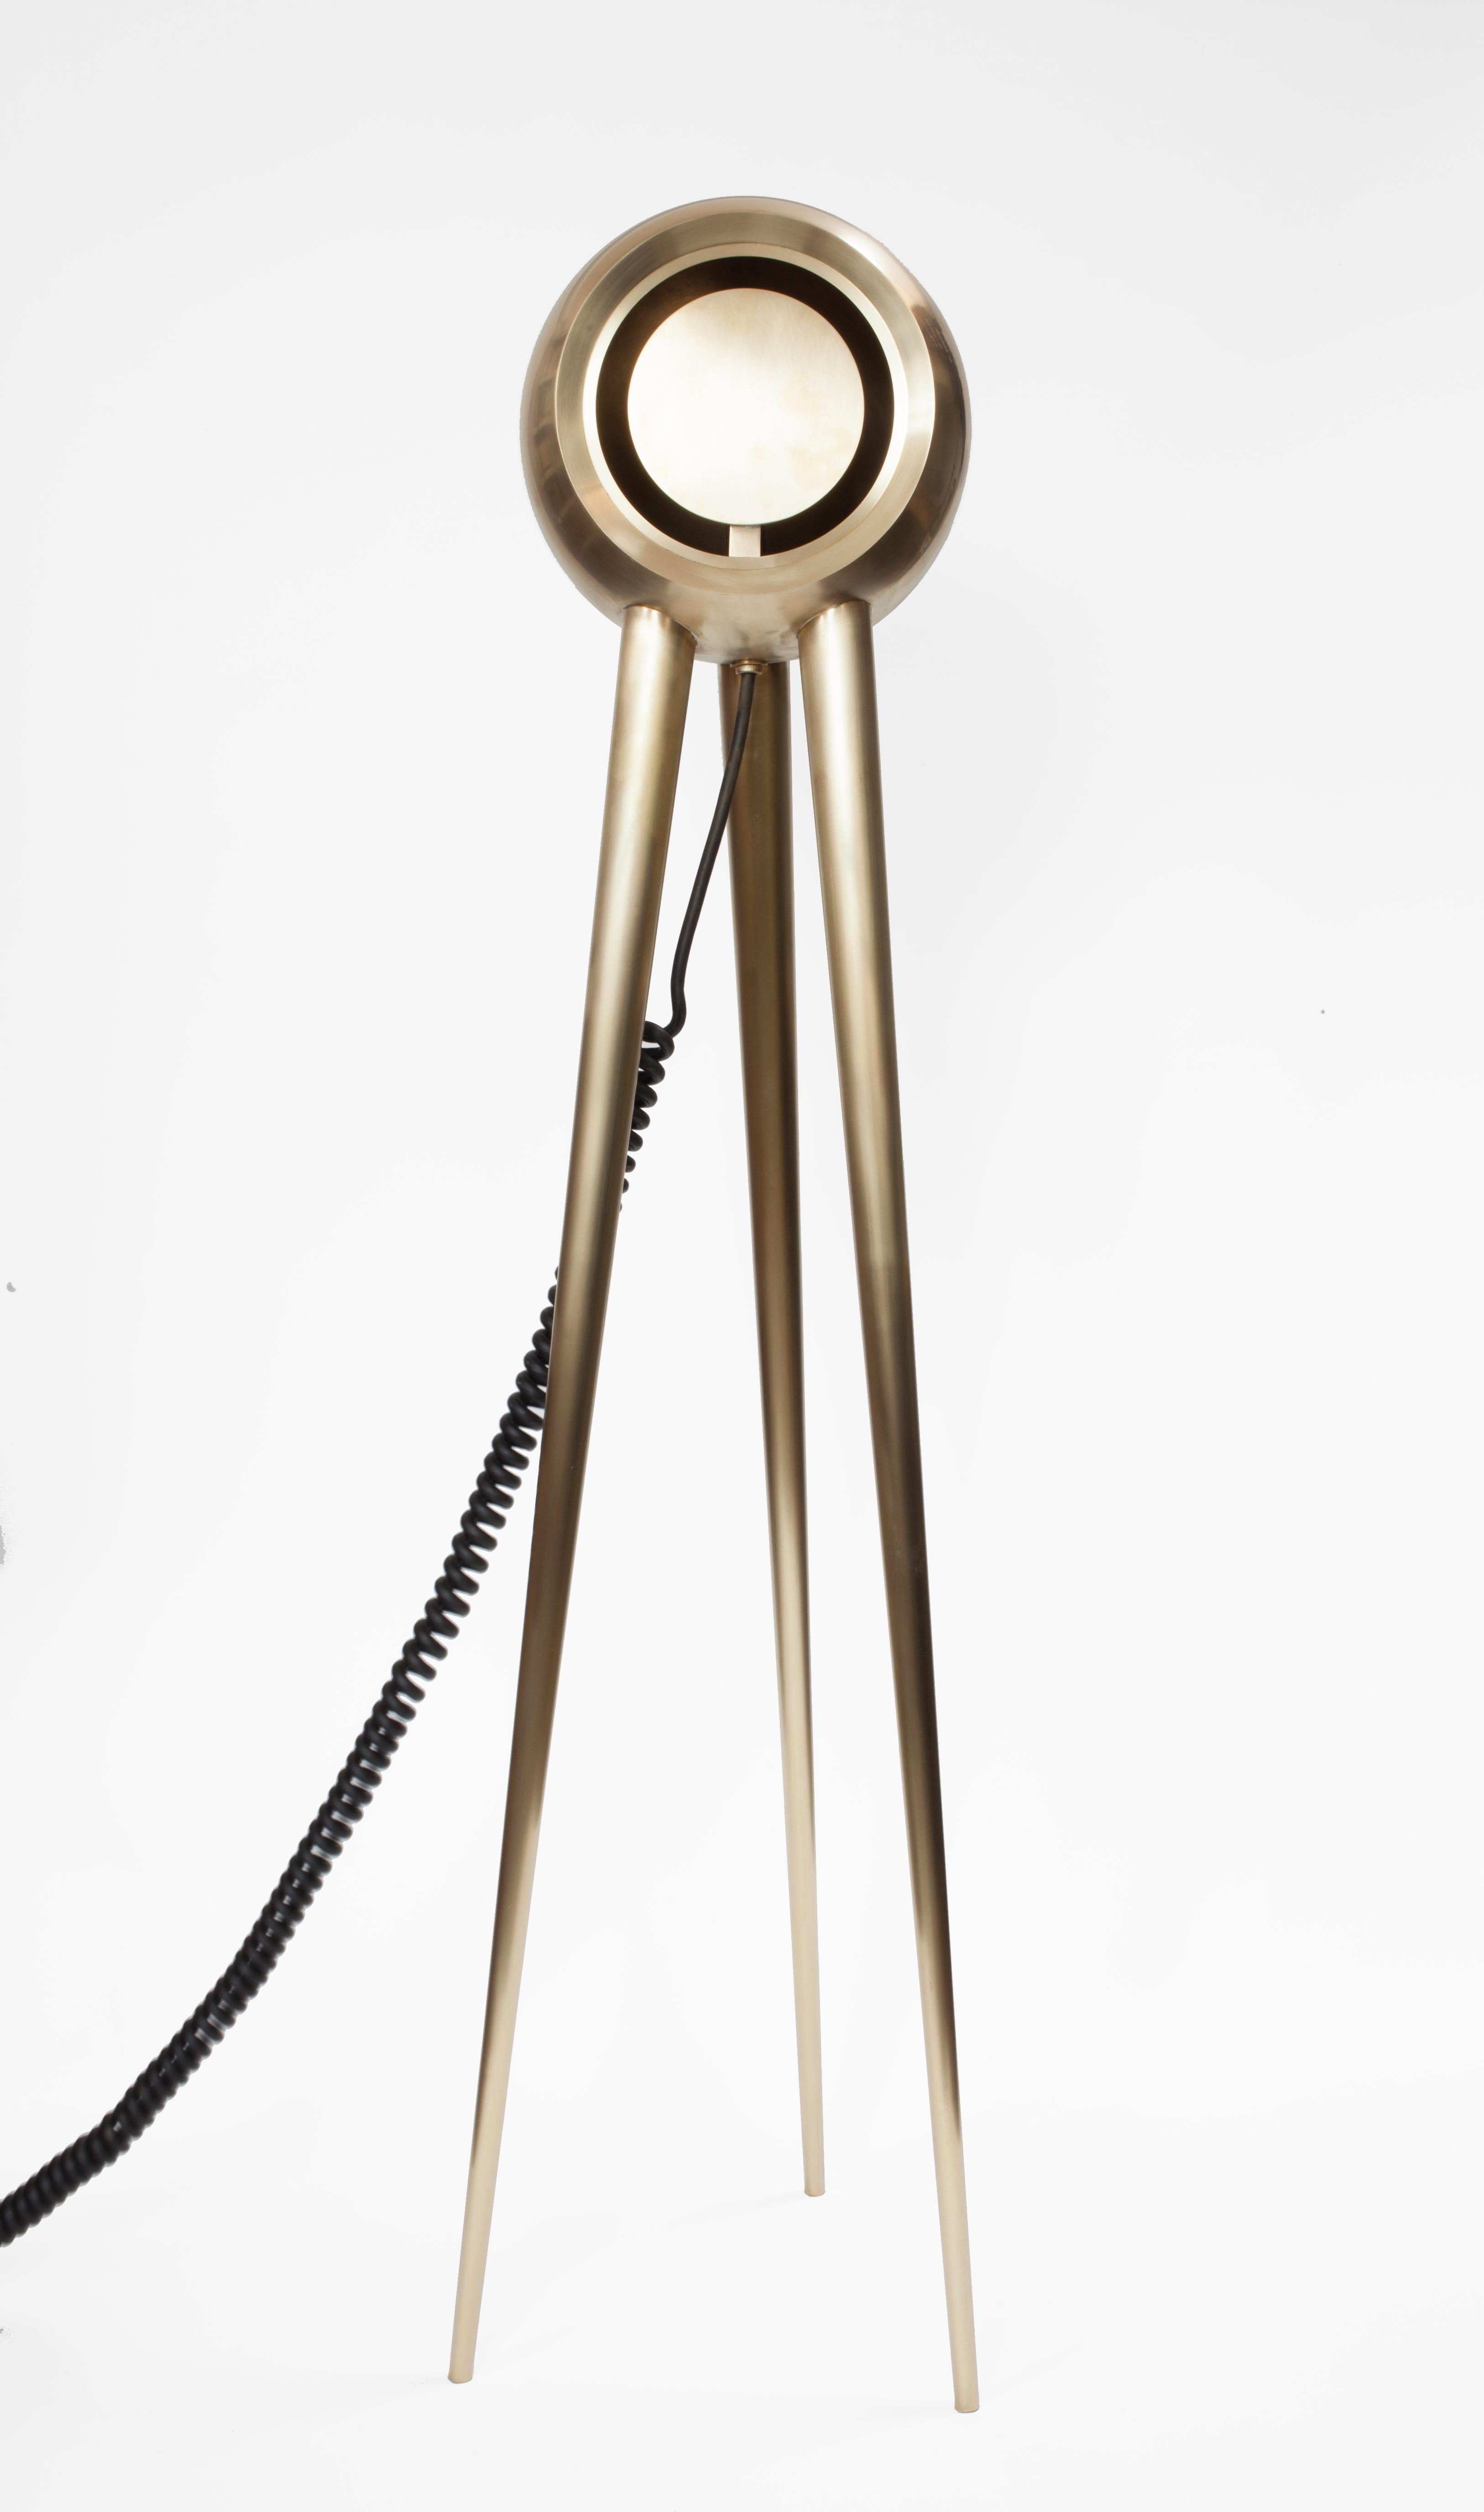 Material Lust [American, b.1981,1986]
Crepuscule Floor Lamp, 2015 
Shown in blackened brass with brushed brass interior. 
Measures: 58